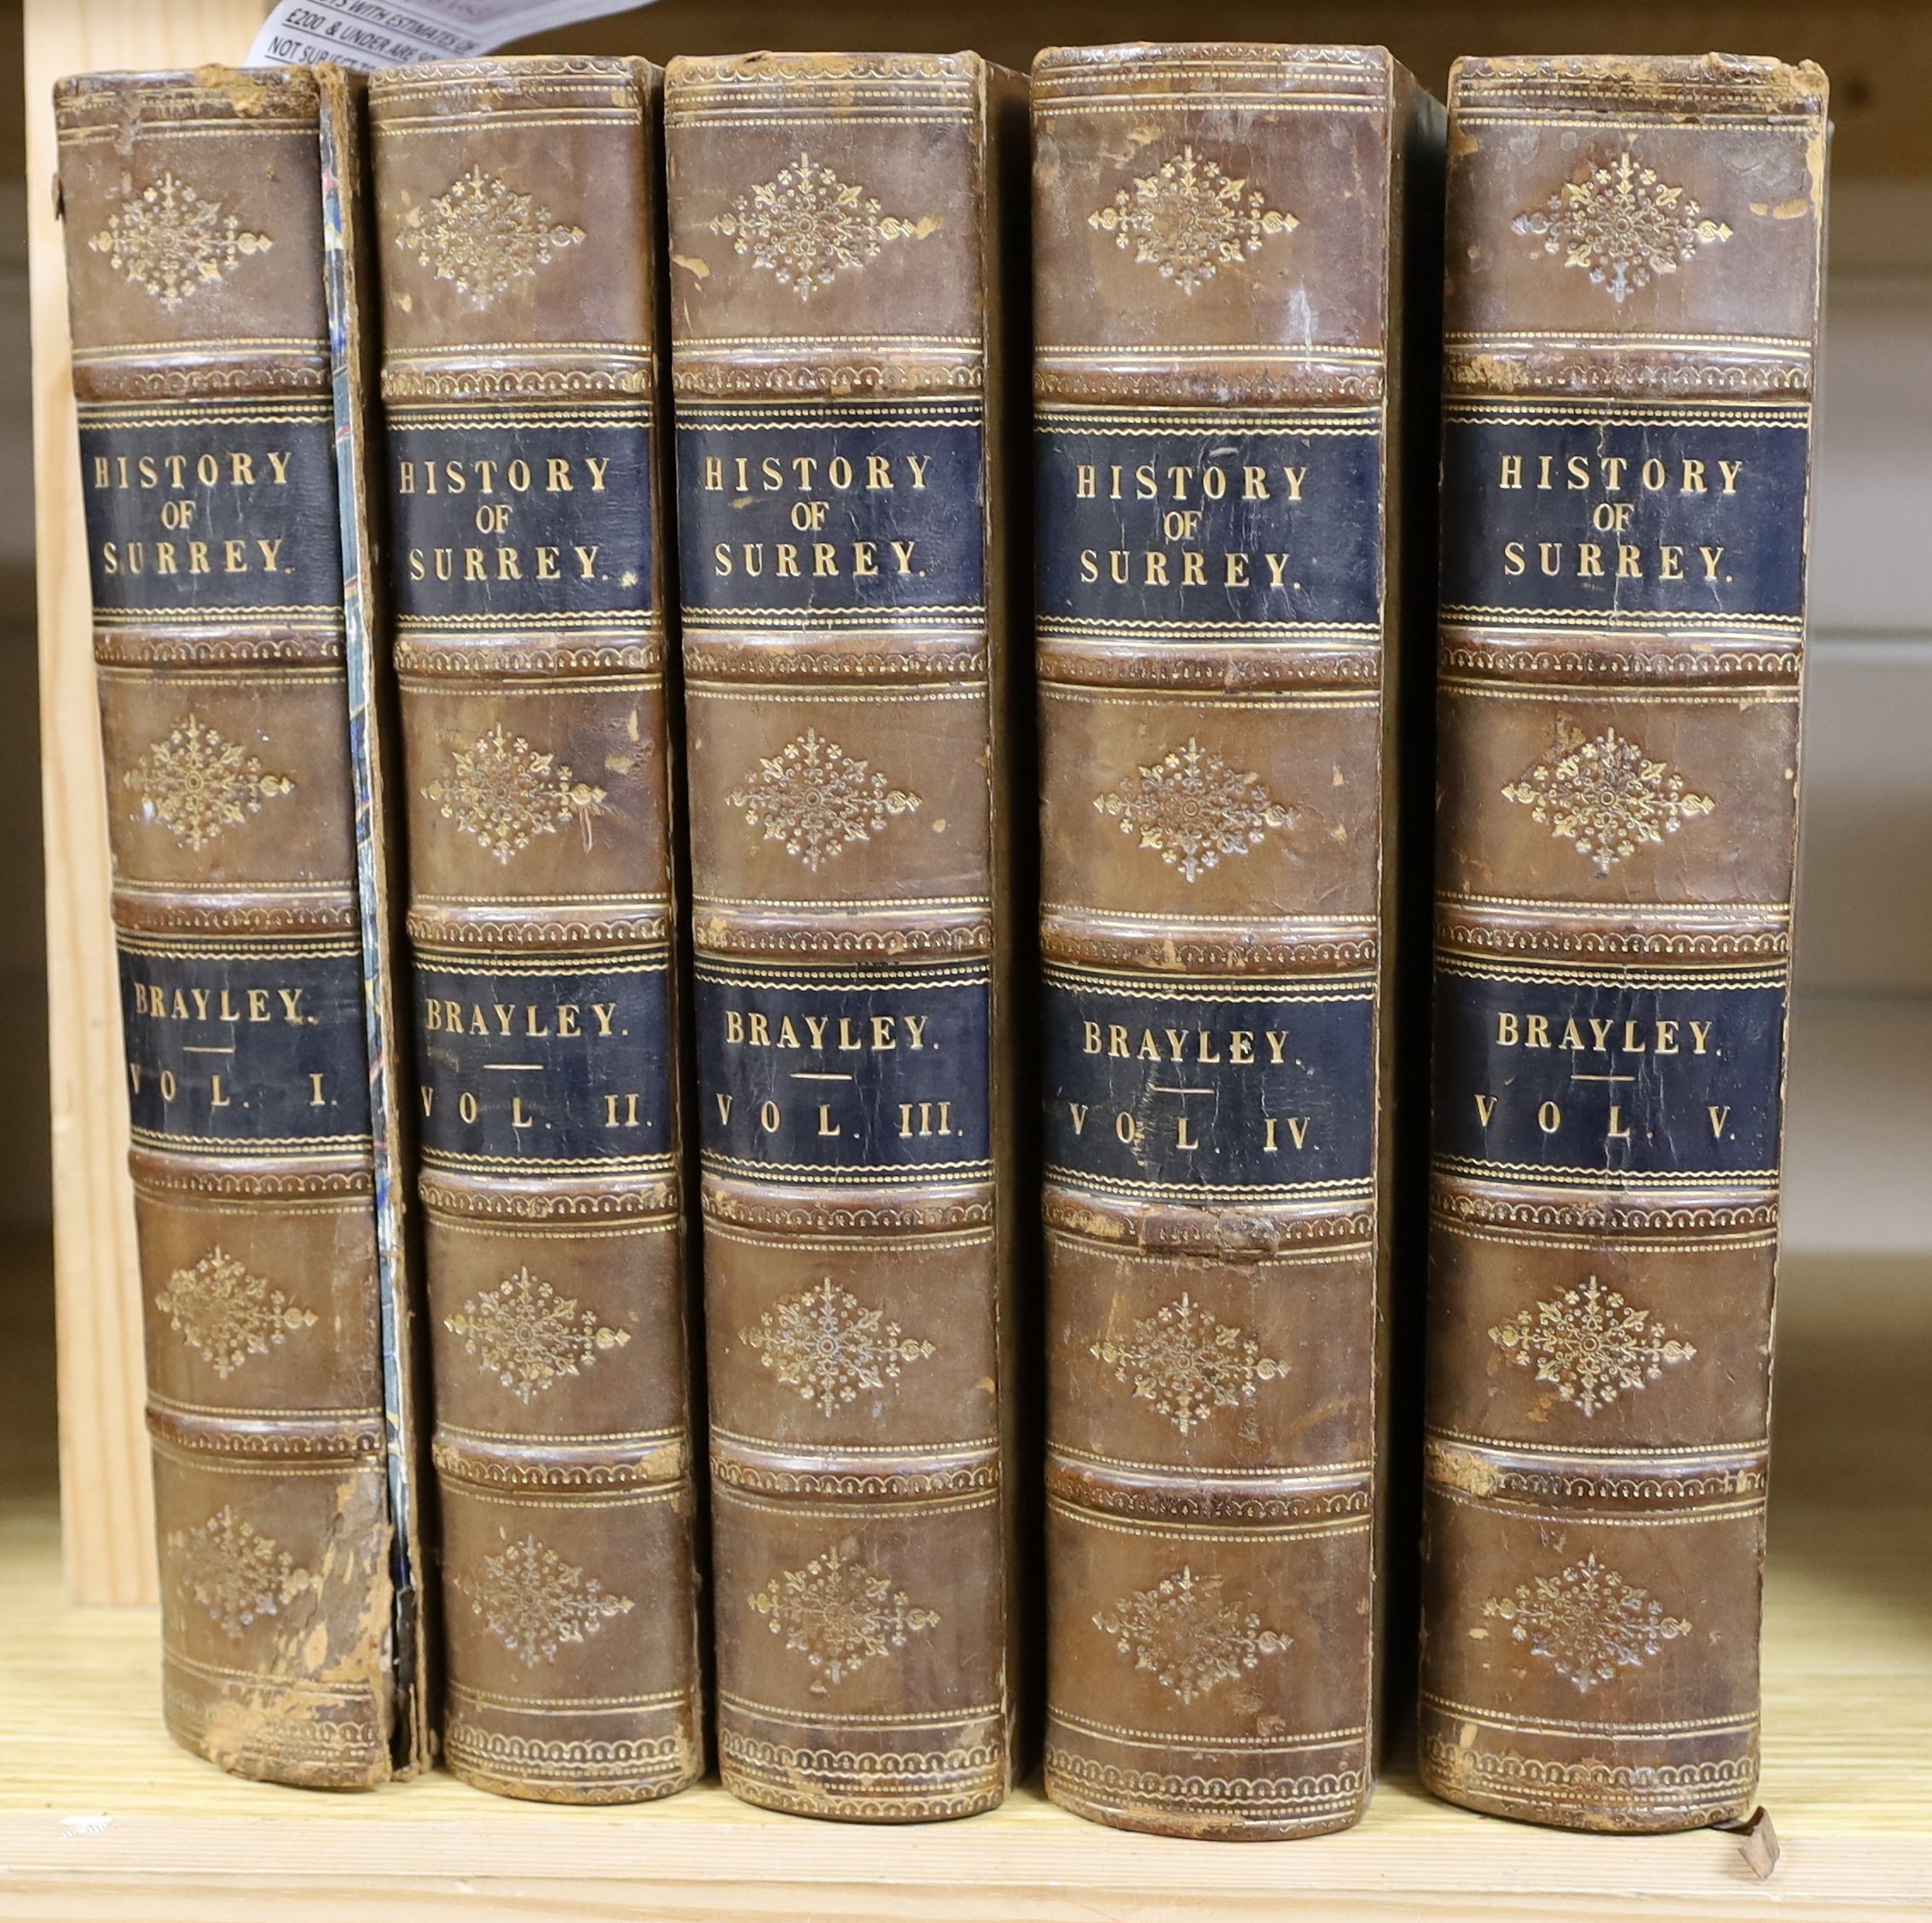 ° ° Brayley, Edward Wedlake - A Topographical History of Surrey .. the Geological section by